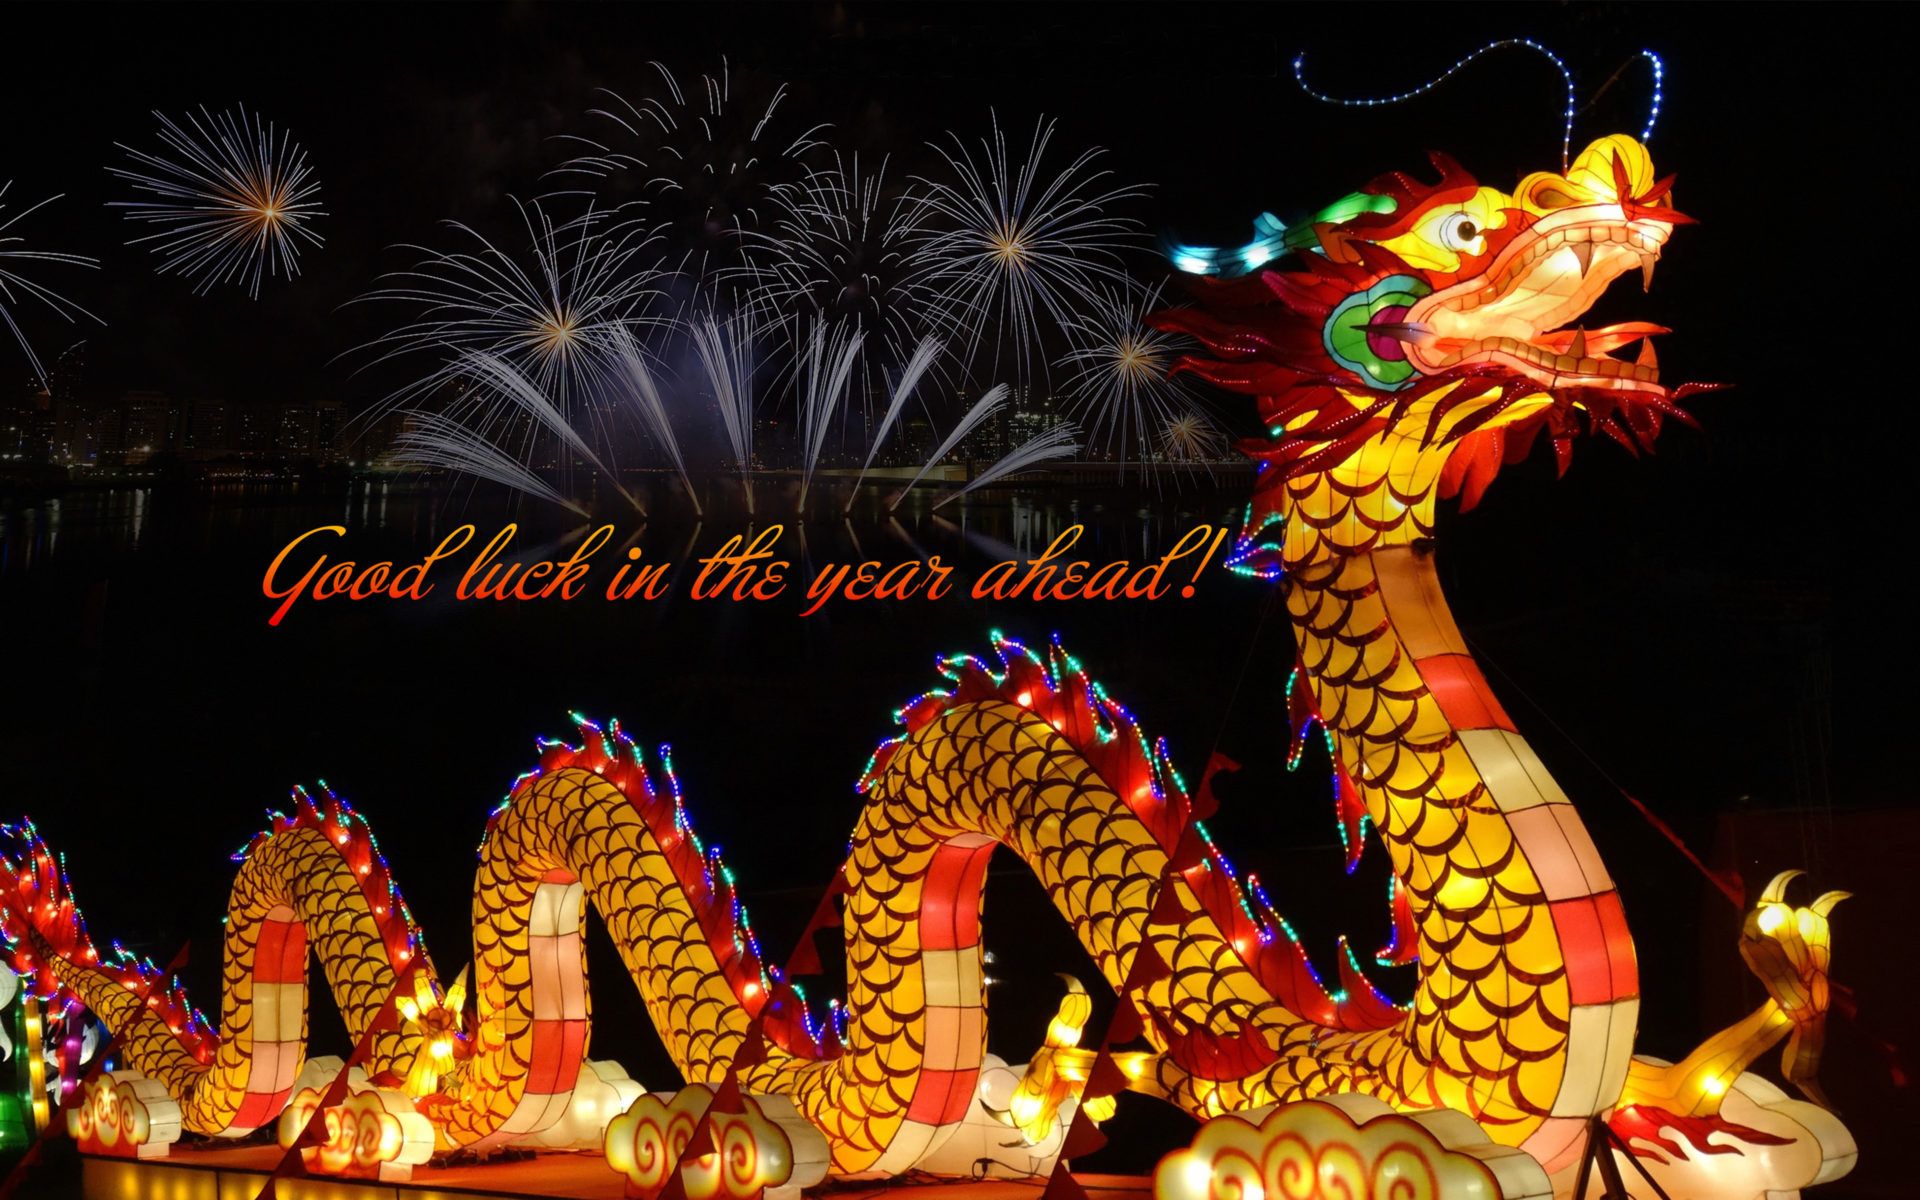 Happy New Year Chinese Wallpaper With Fireworks And Dragon Greeting Card For Your Android Mobile Phones And Desktop, Wallpaper13.com